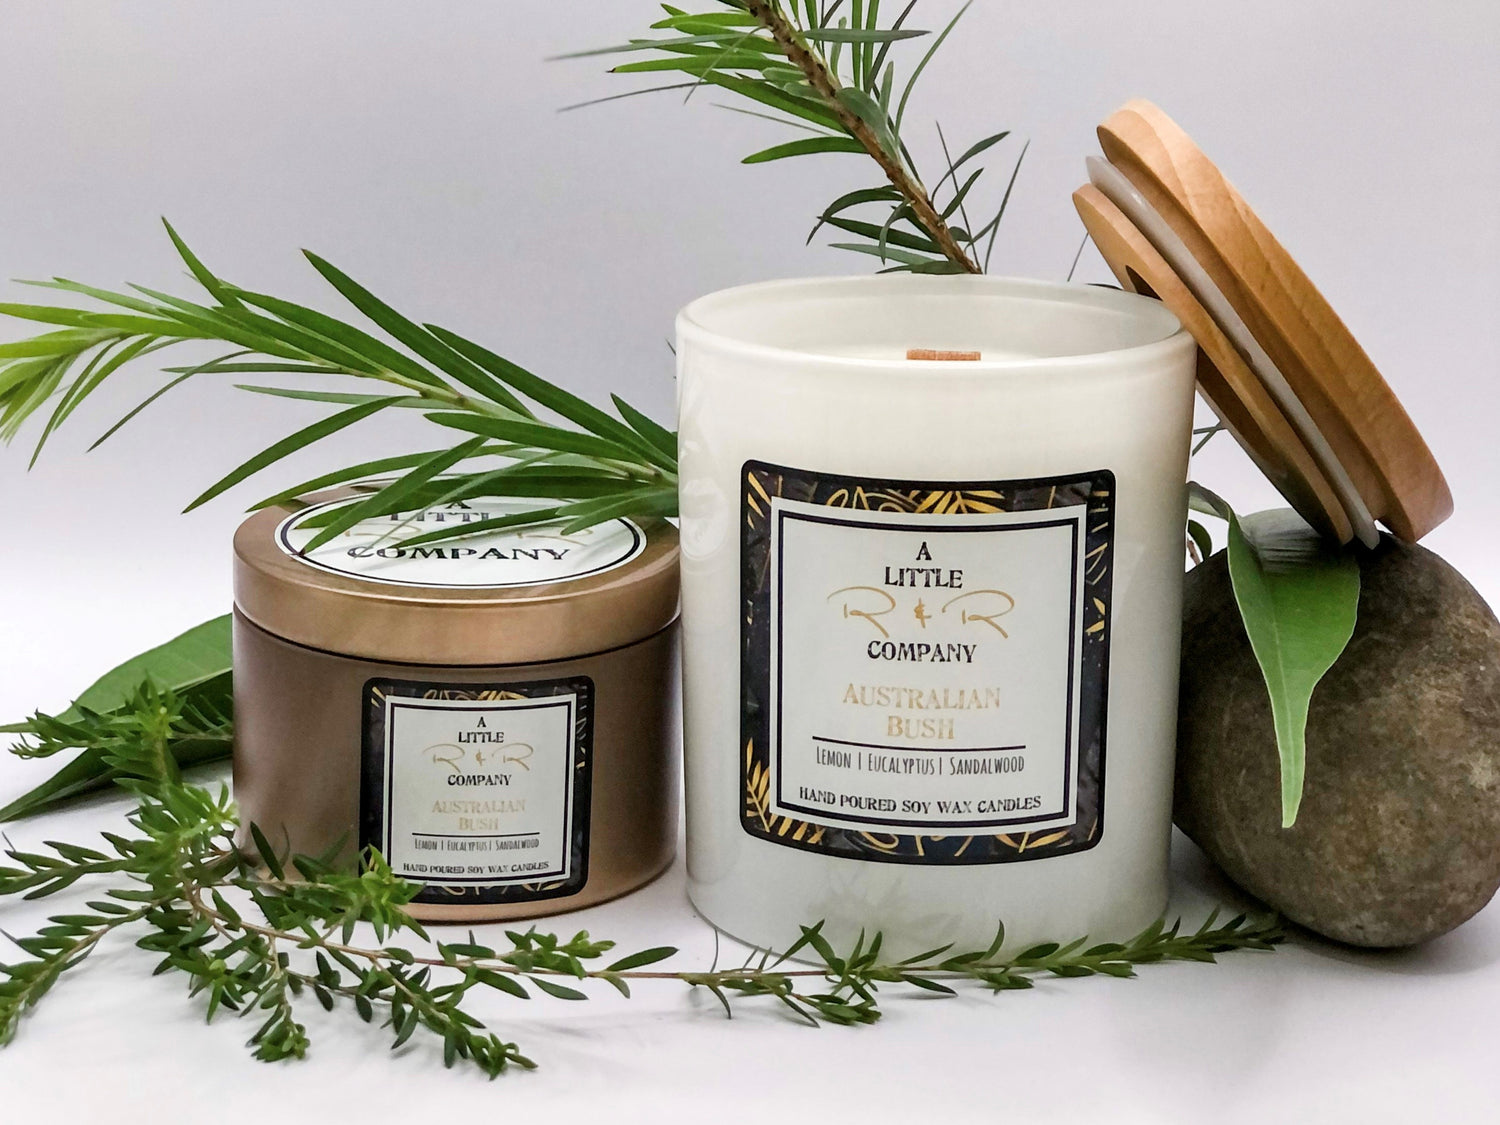 Australian Bush Soy Wax Candle surrounded by native plants and a boulder